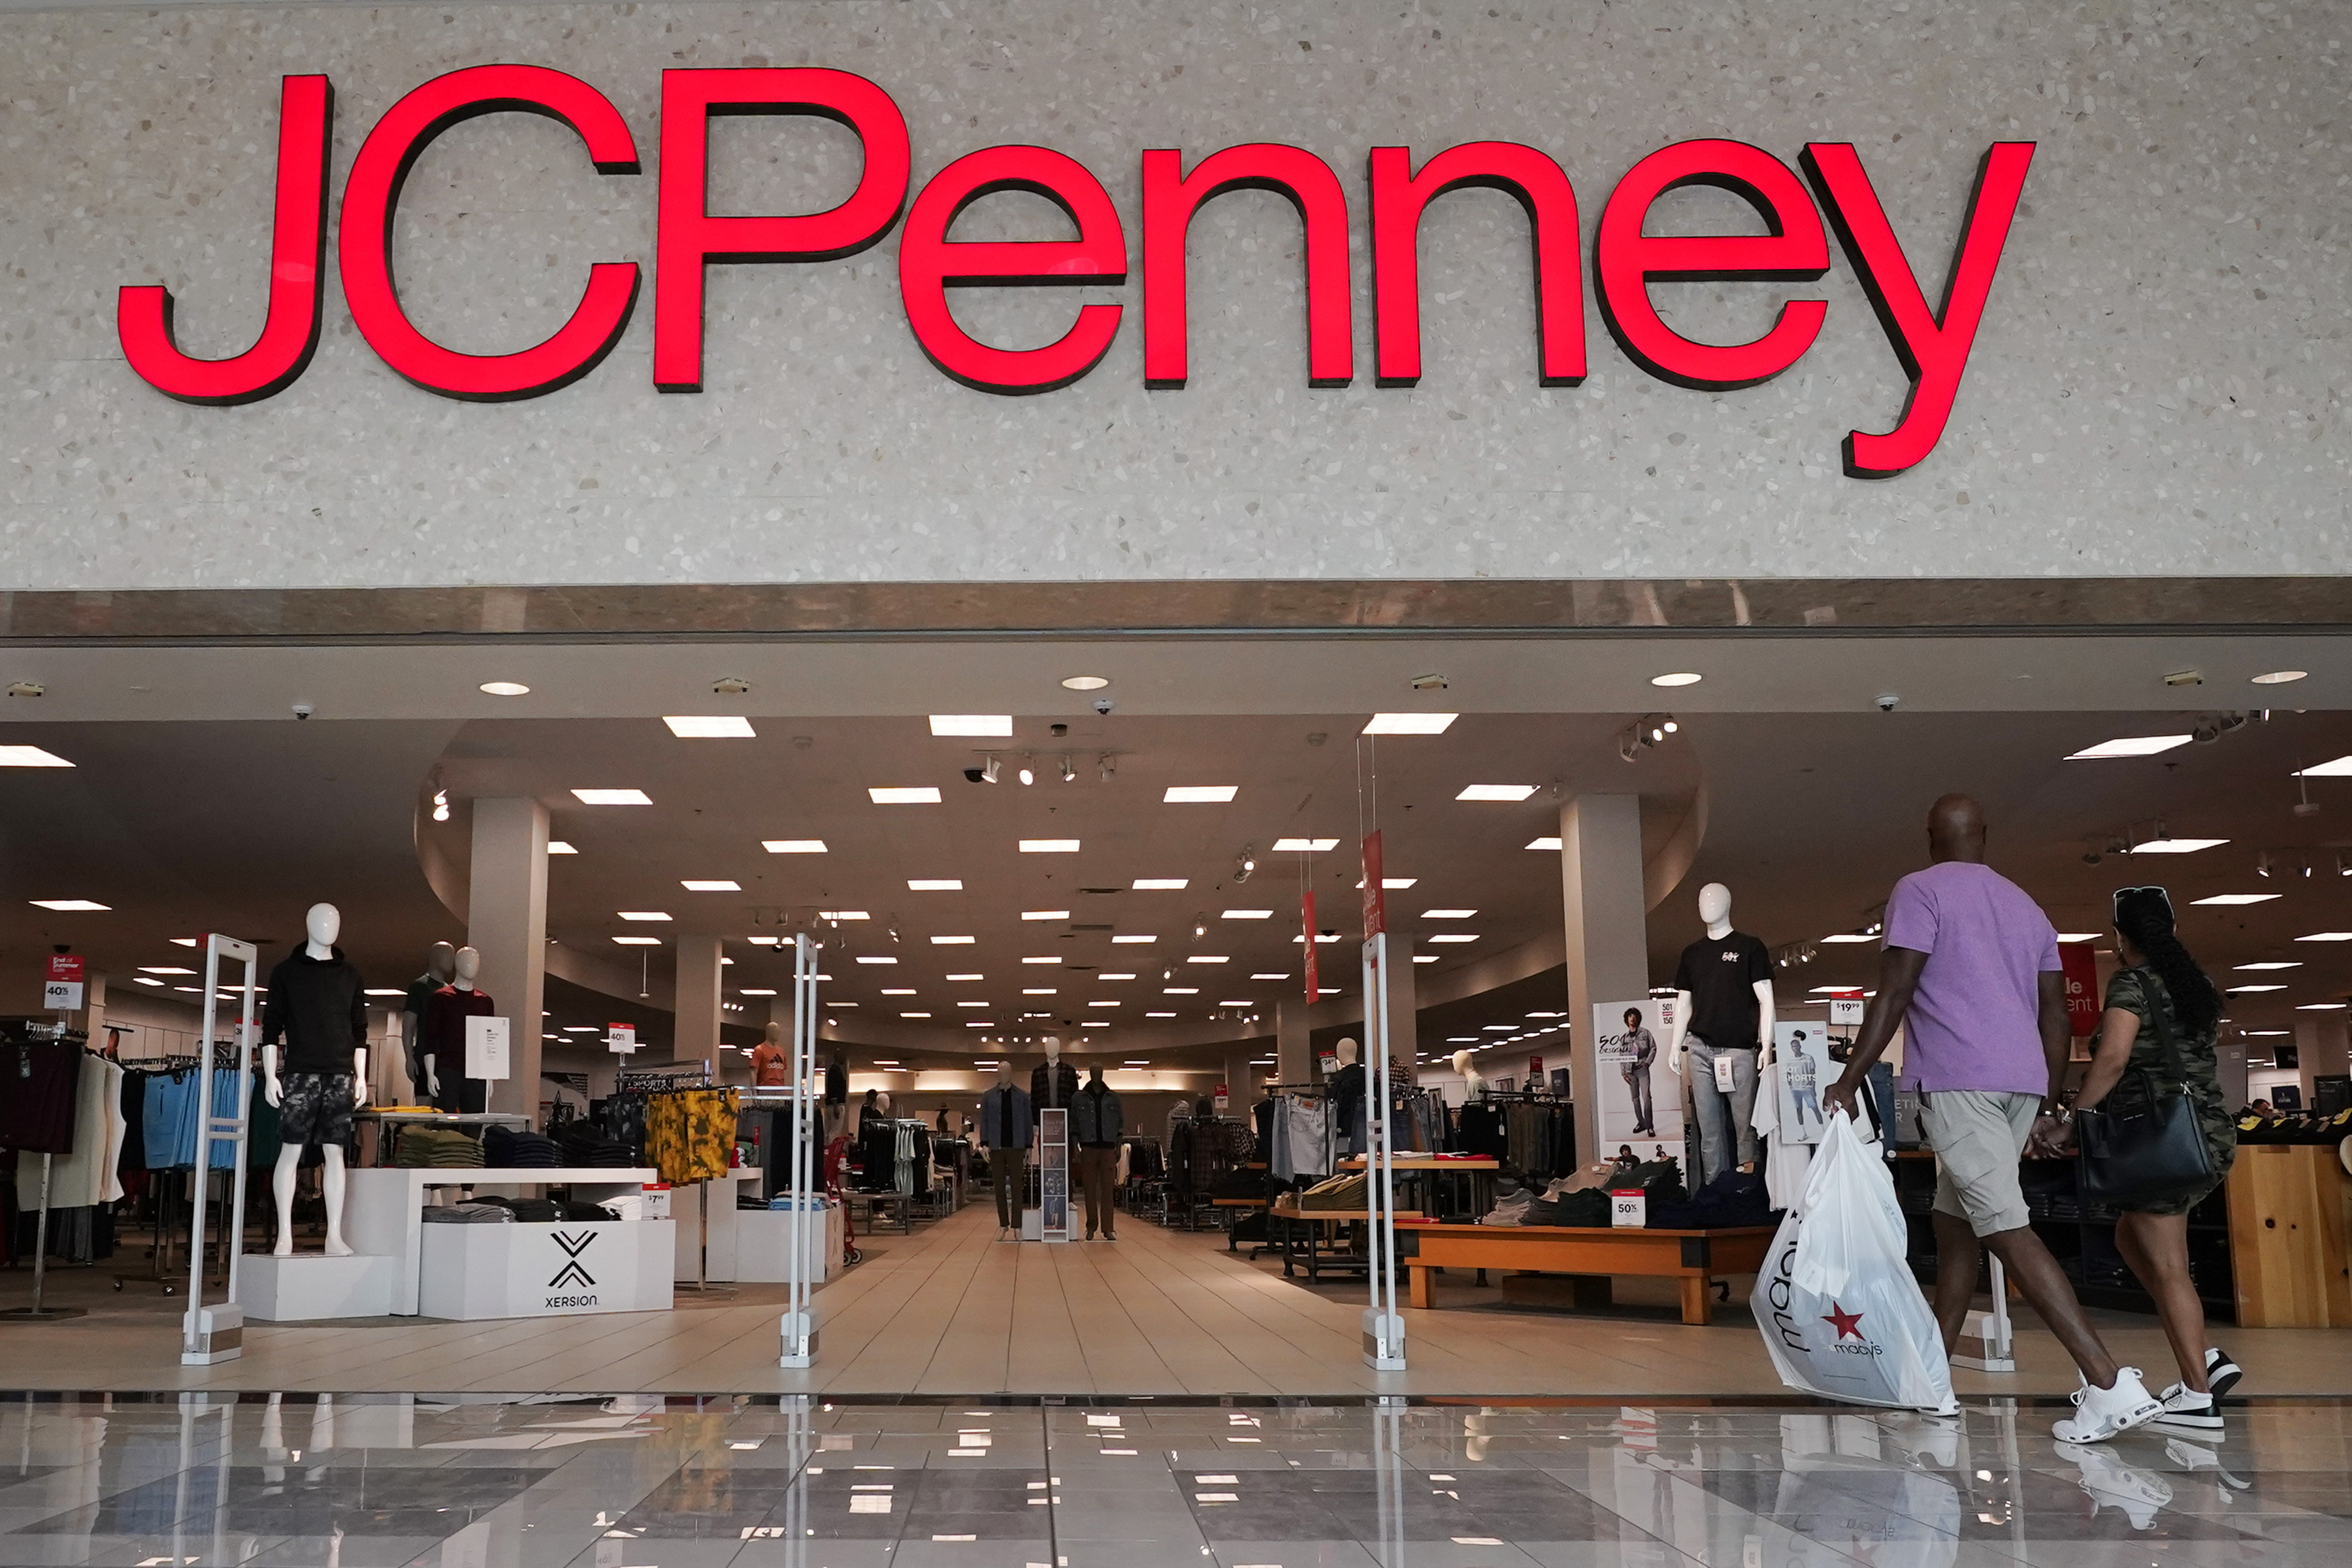 jcpenney miami dolphins